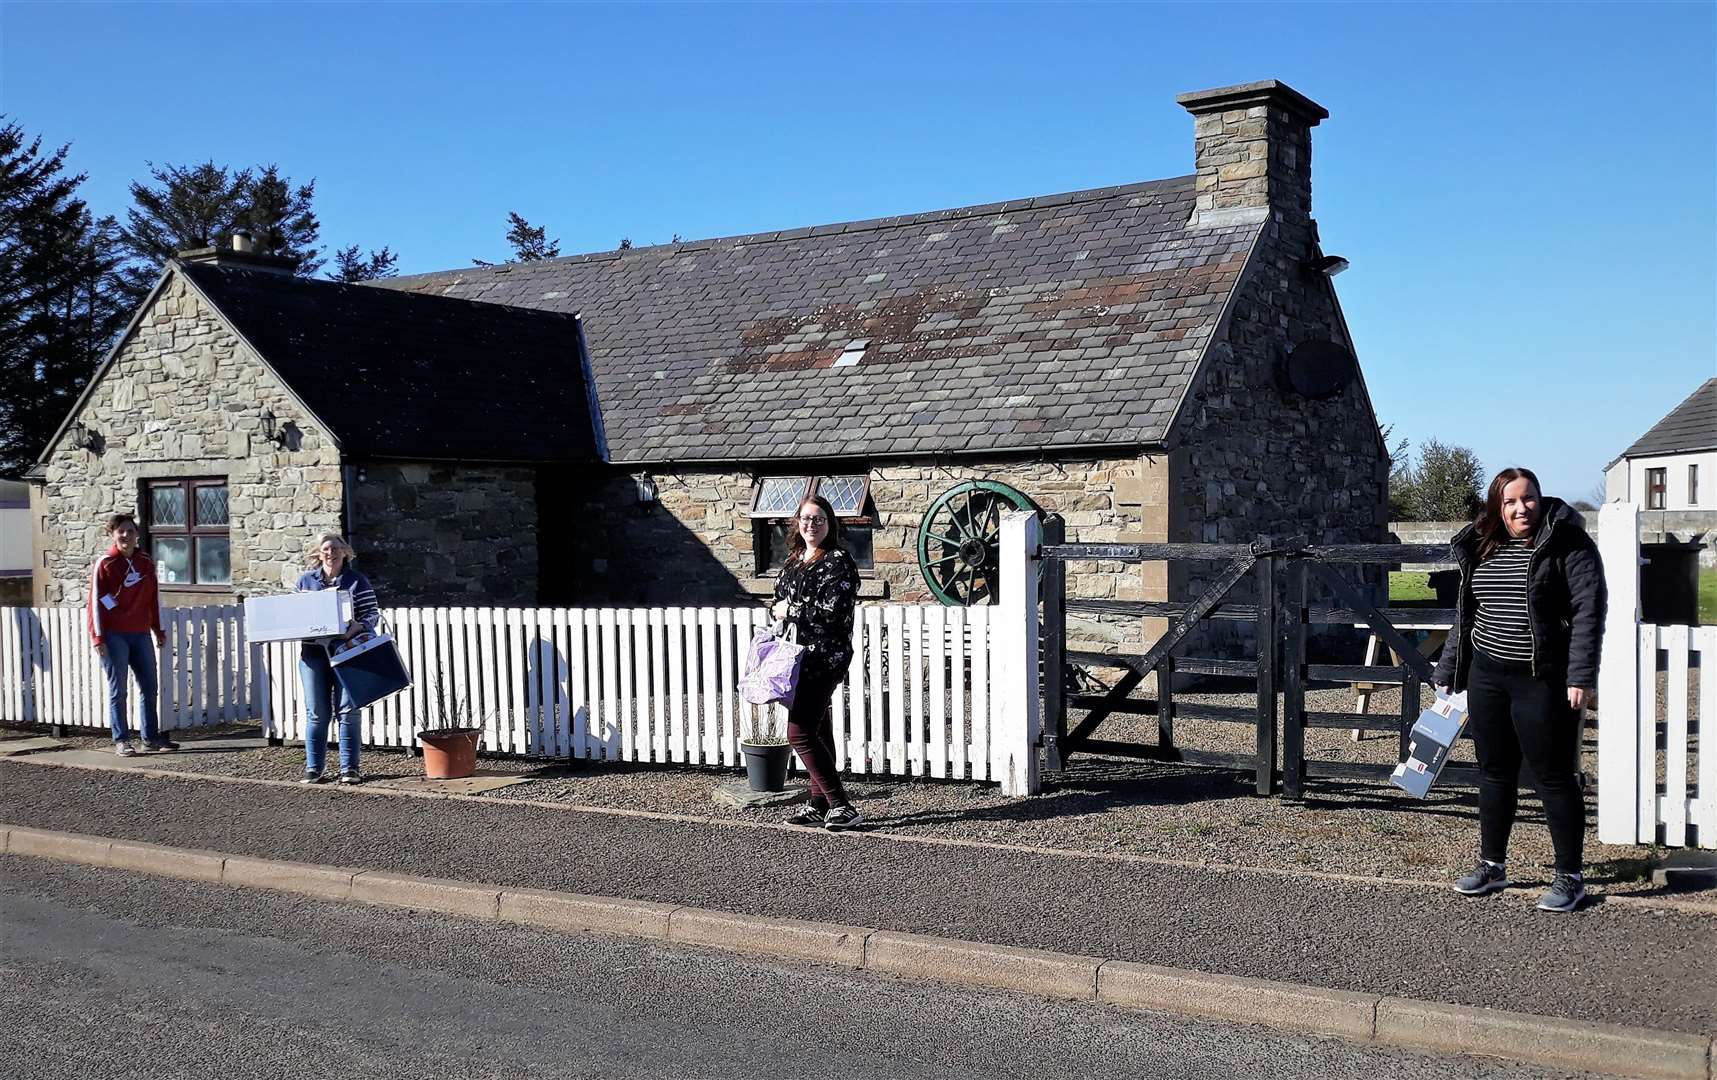 Local volunteers observe social distancing as they queue outside the Old Smiddy Inn for meals they deliver around homes in the Thrumster area. Picture: Raymond Bremner